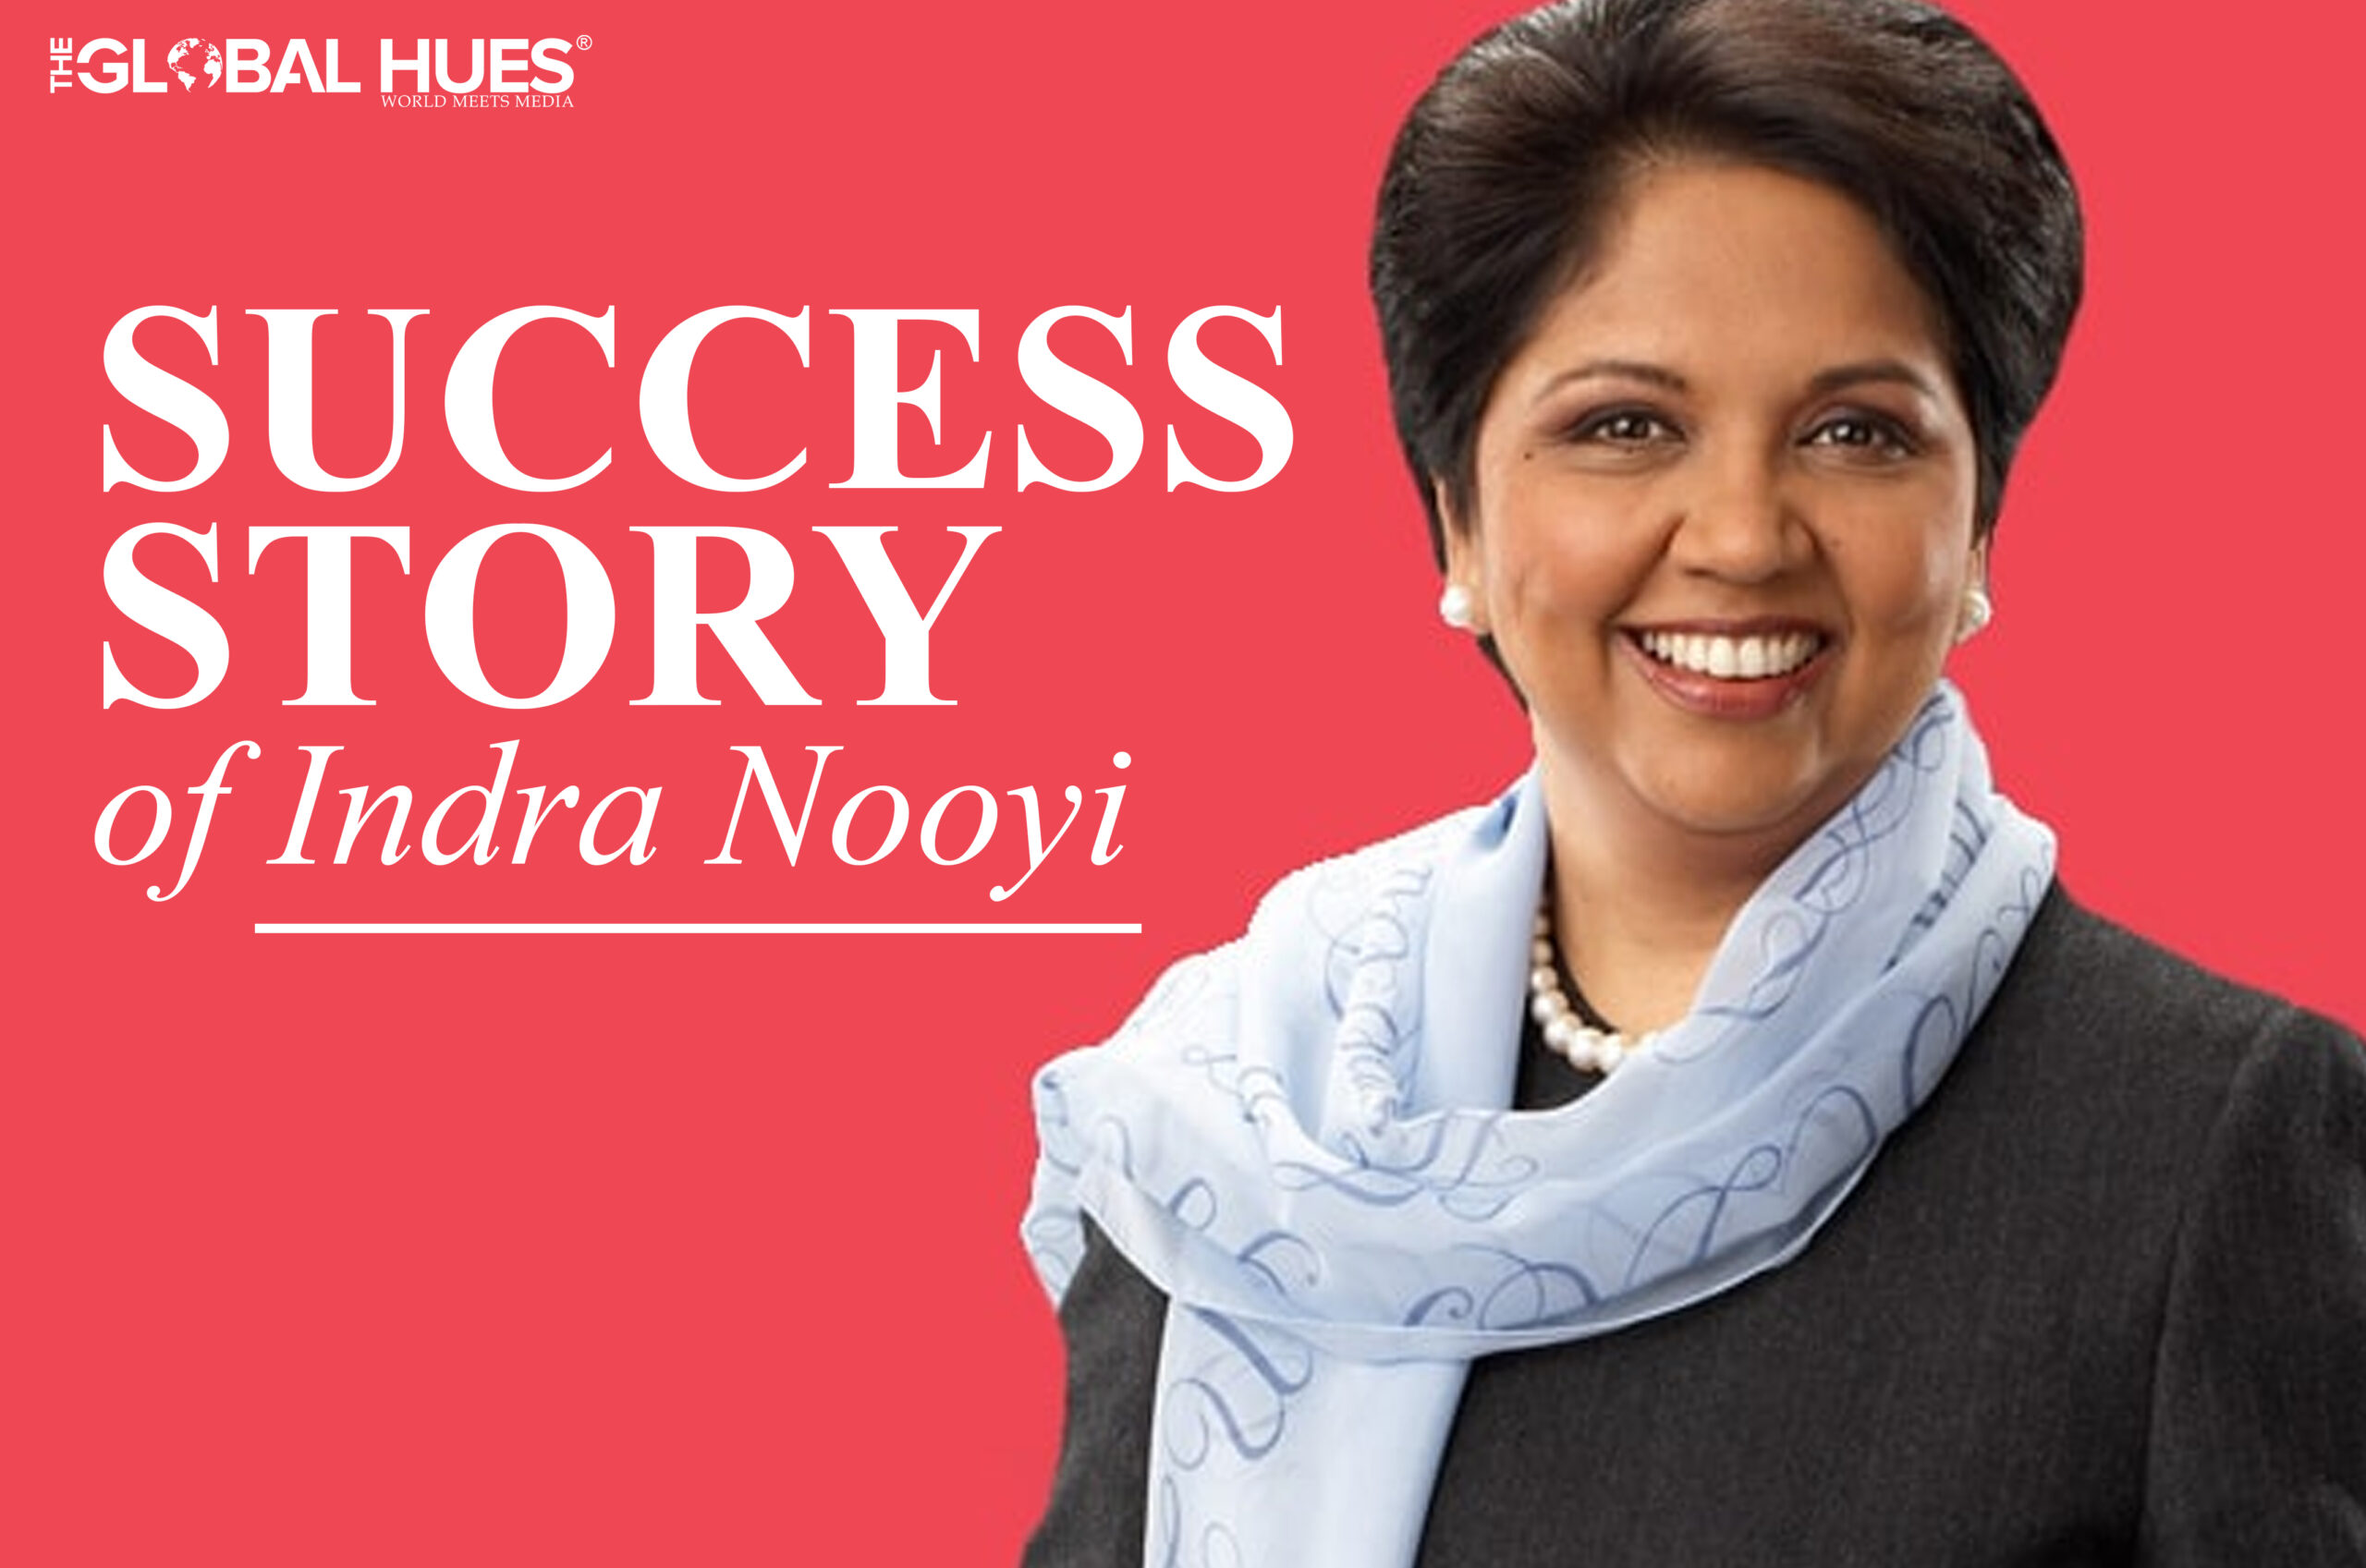 The Success Story of Indra Nooyi | The Global Hues